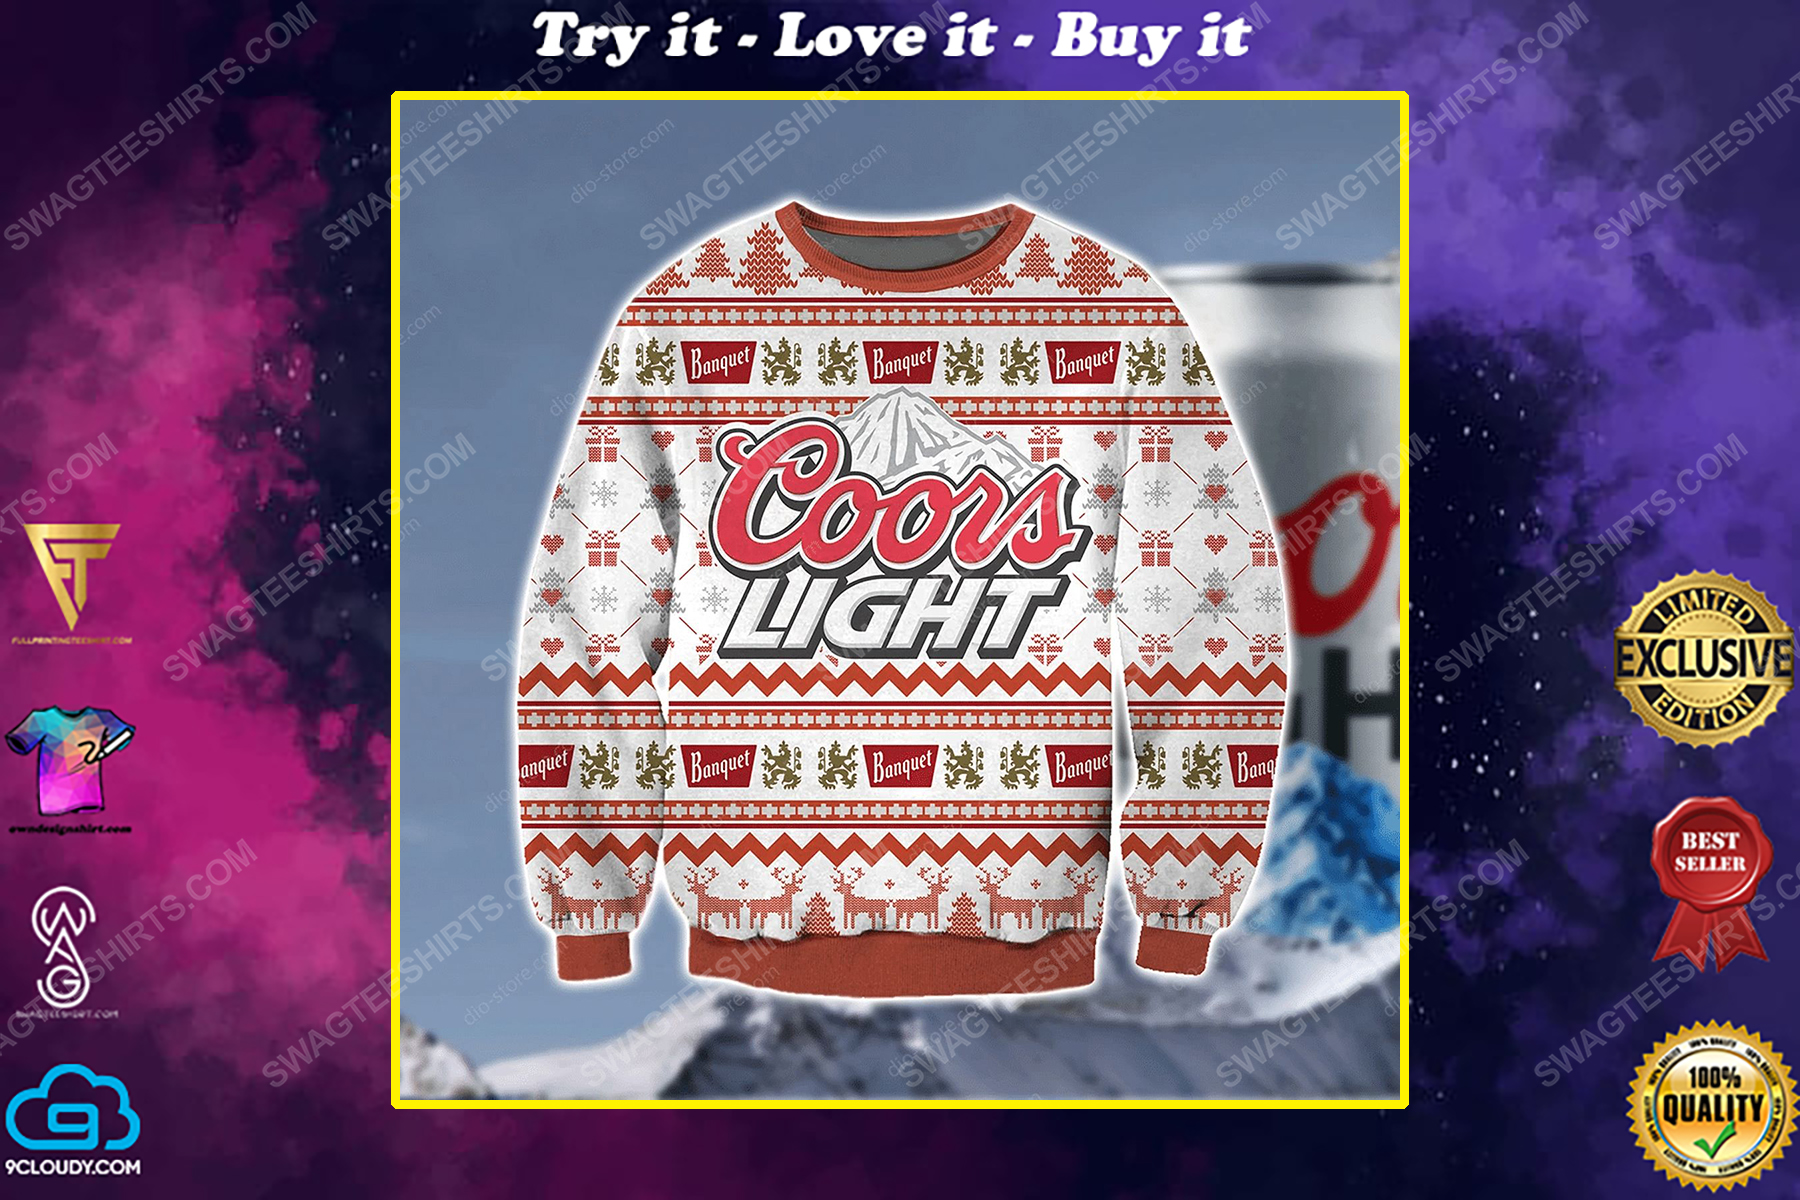 Coors light banquet beer ugly christmas sweater 1